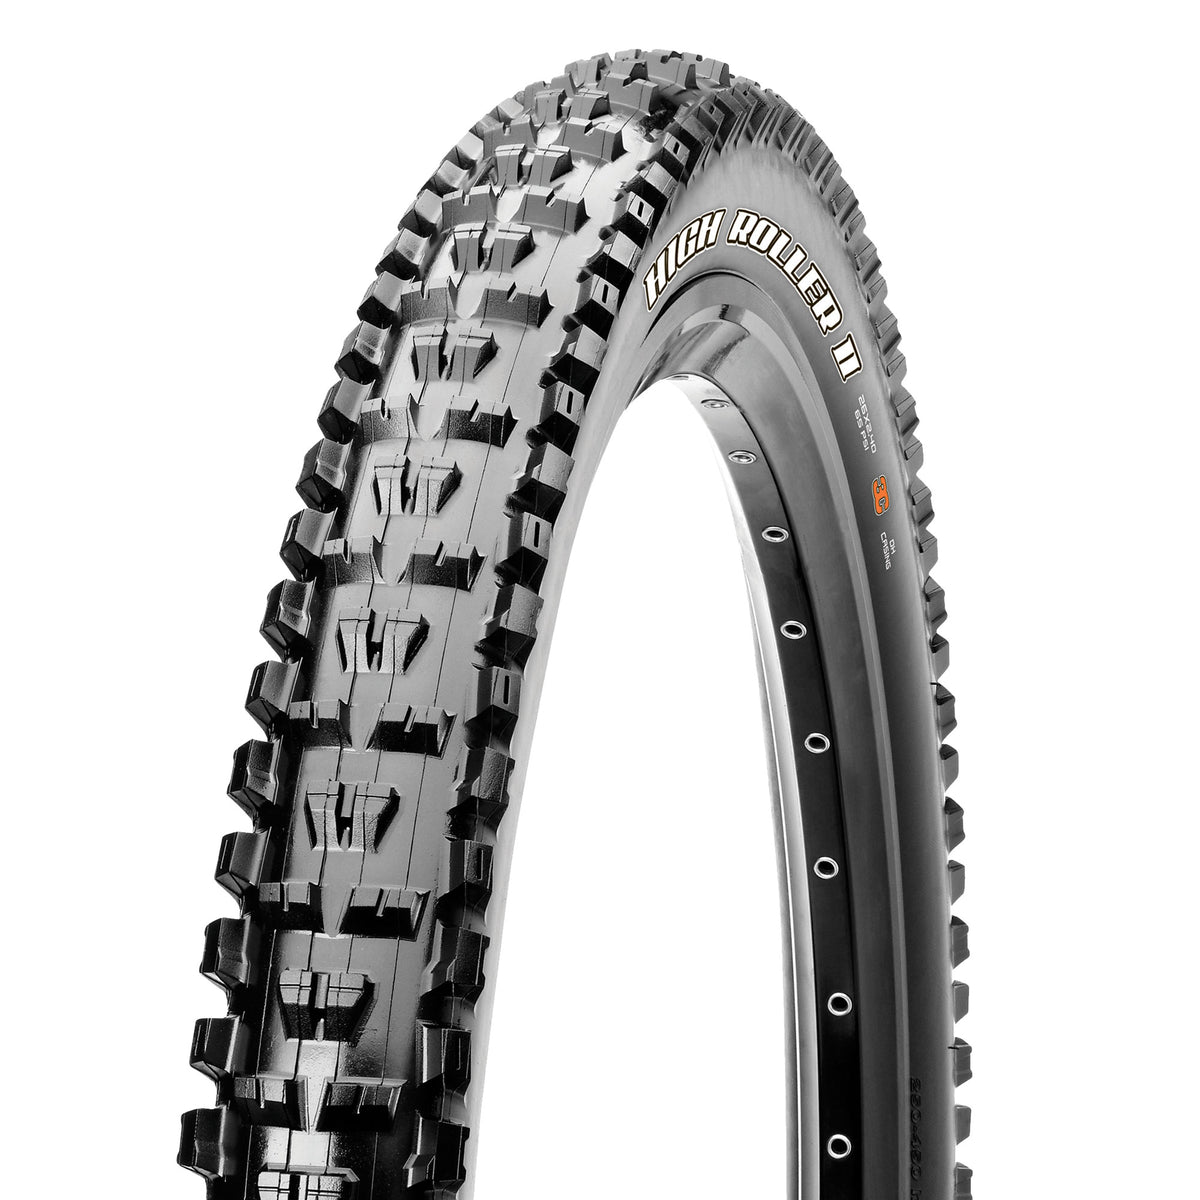 High Roller II - Maxxis Tires - USA | Shop Tires